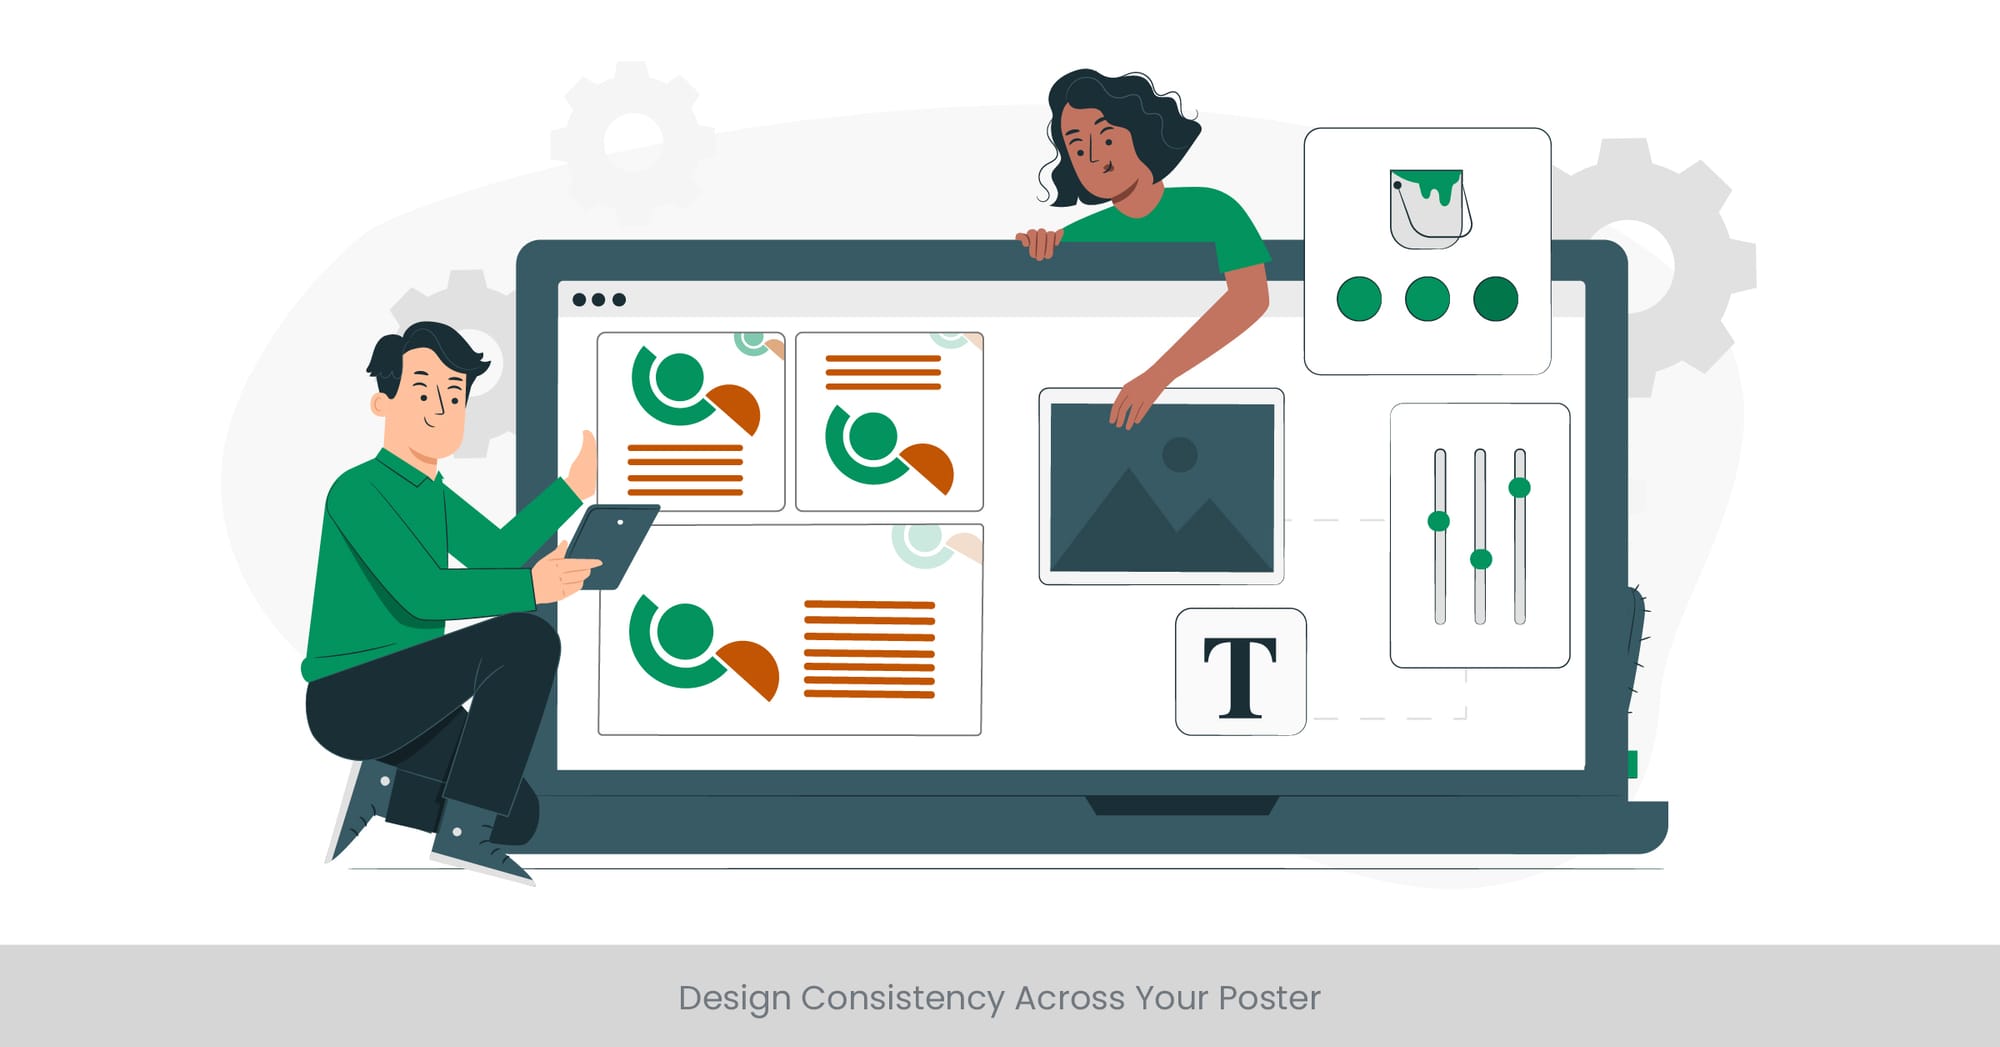 Design Consistency Across Your Poster